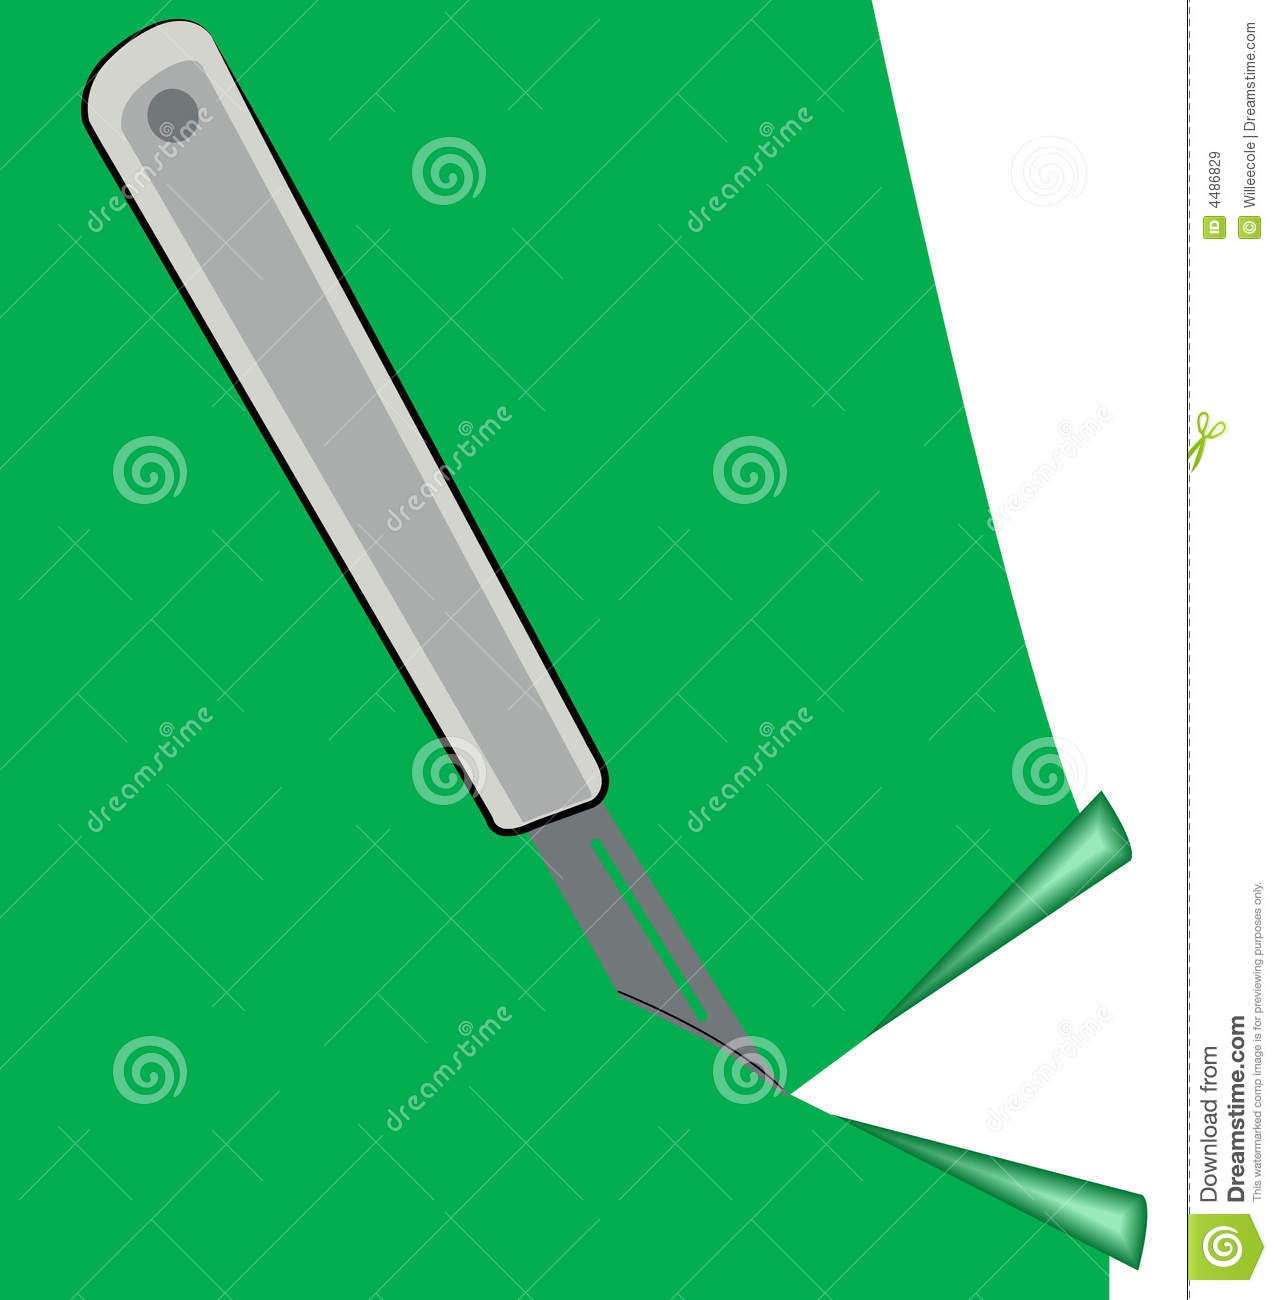 Knife Cutting Paper Royalty Free Stock Images   Image  4486829